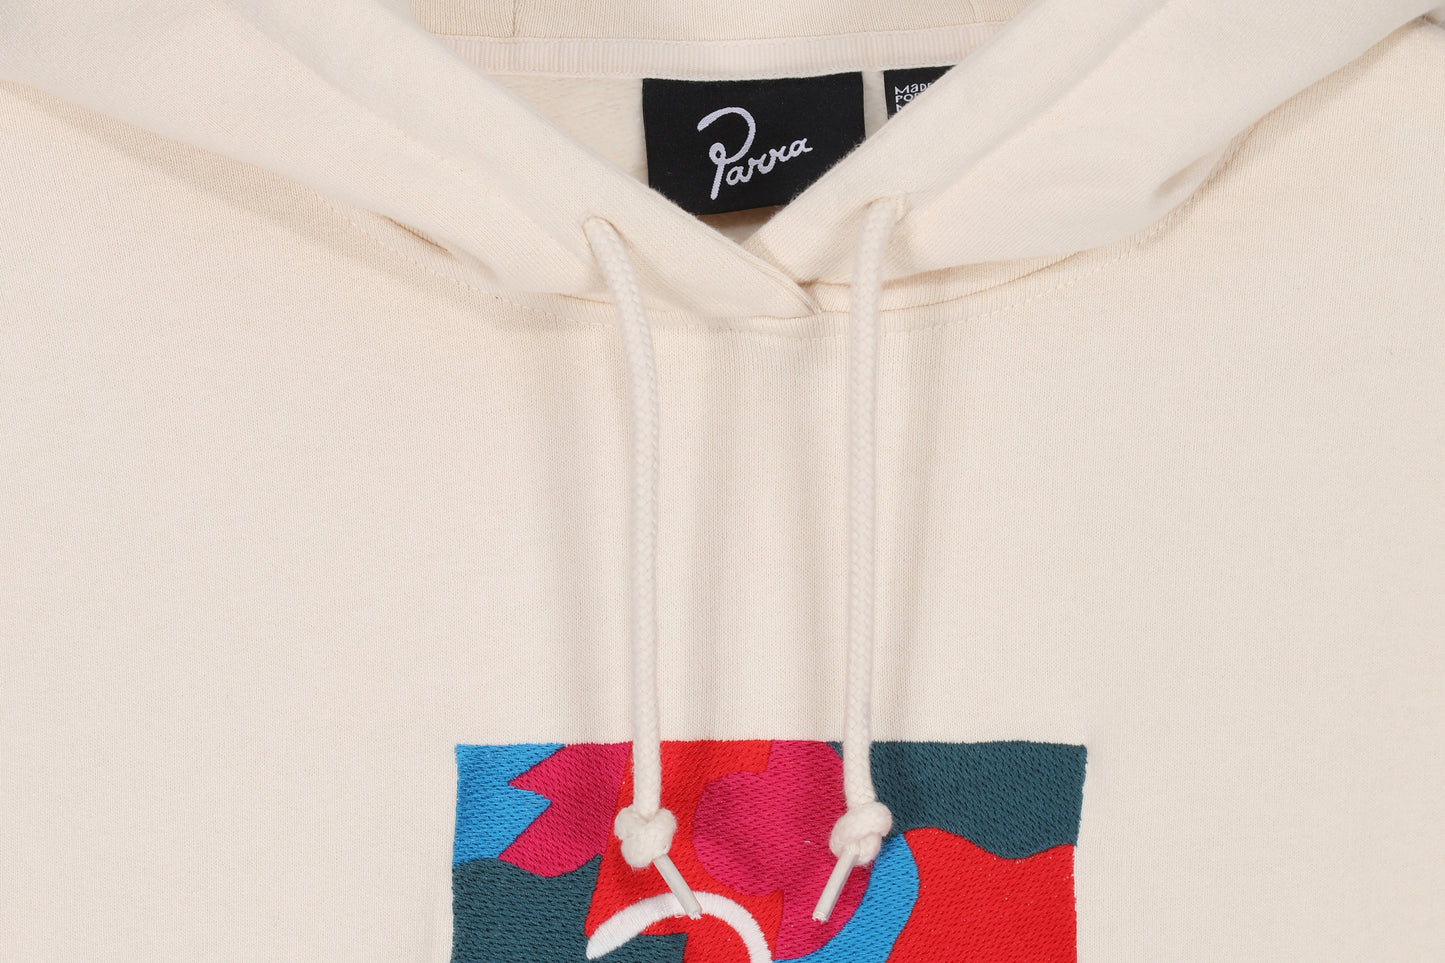 By Parra Abstract Shapes Hooded Sweatshirt